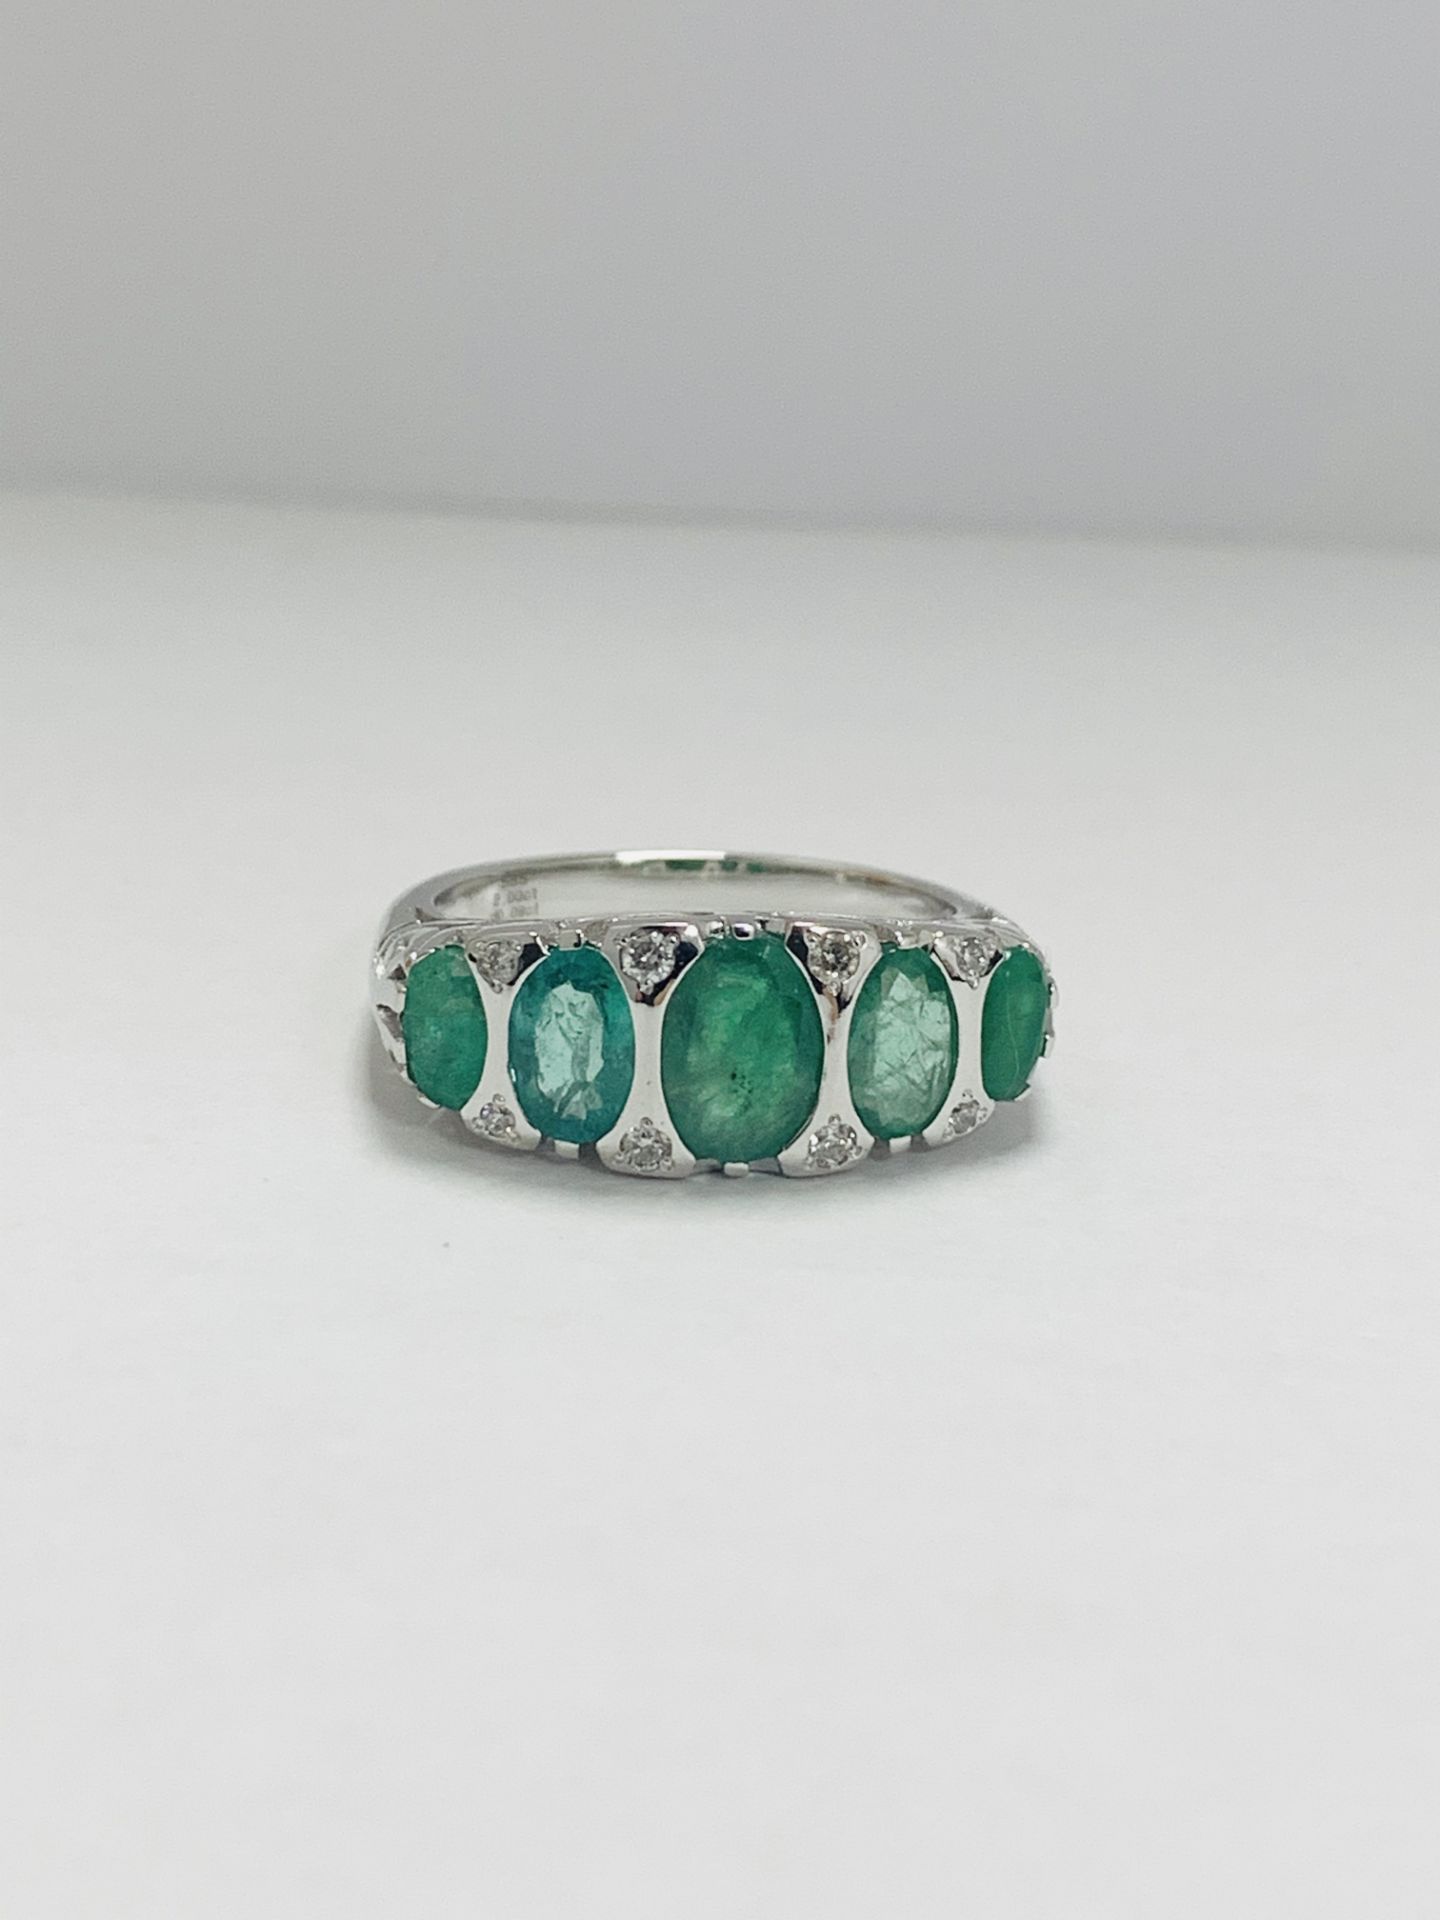 14Ct White Gold Emerald And Diamond Ring - Image 6 of 9